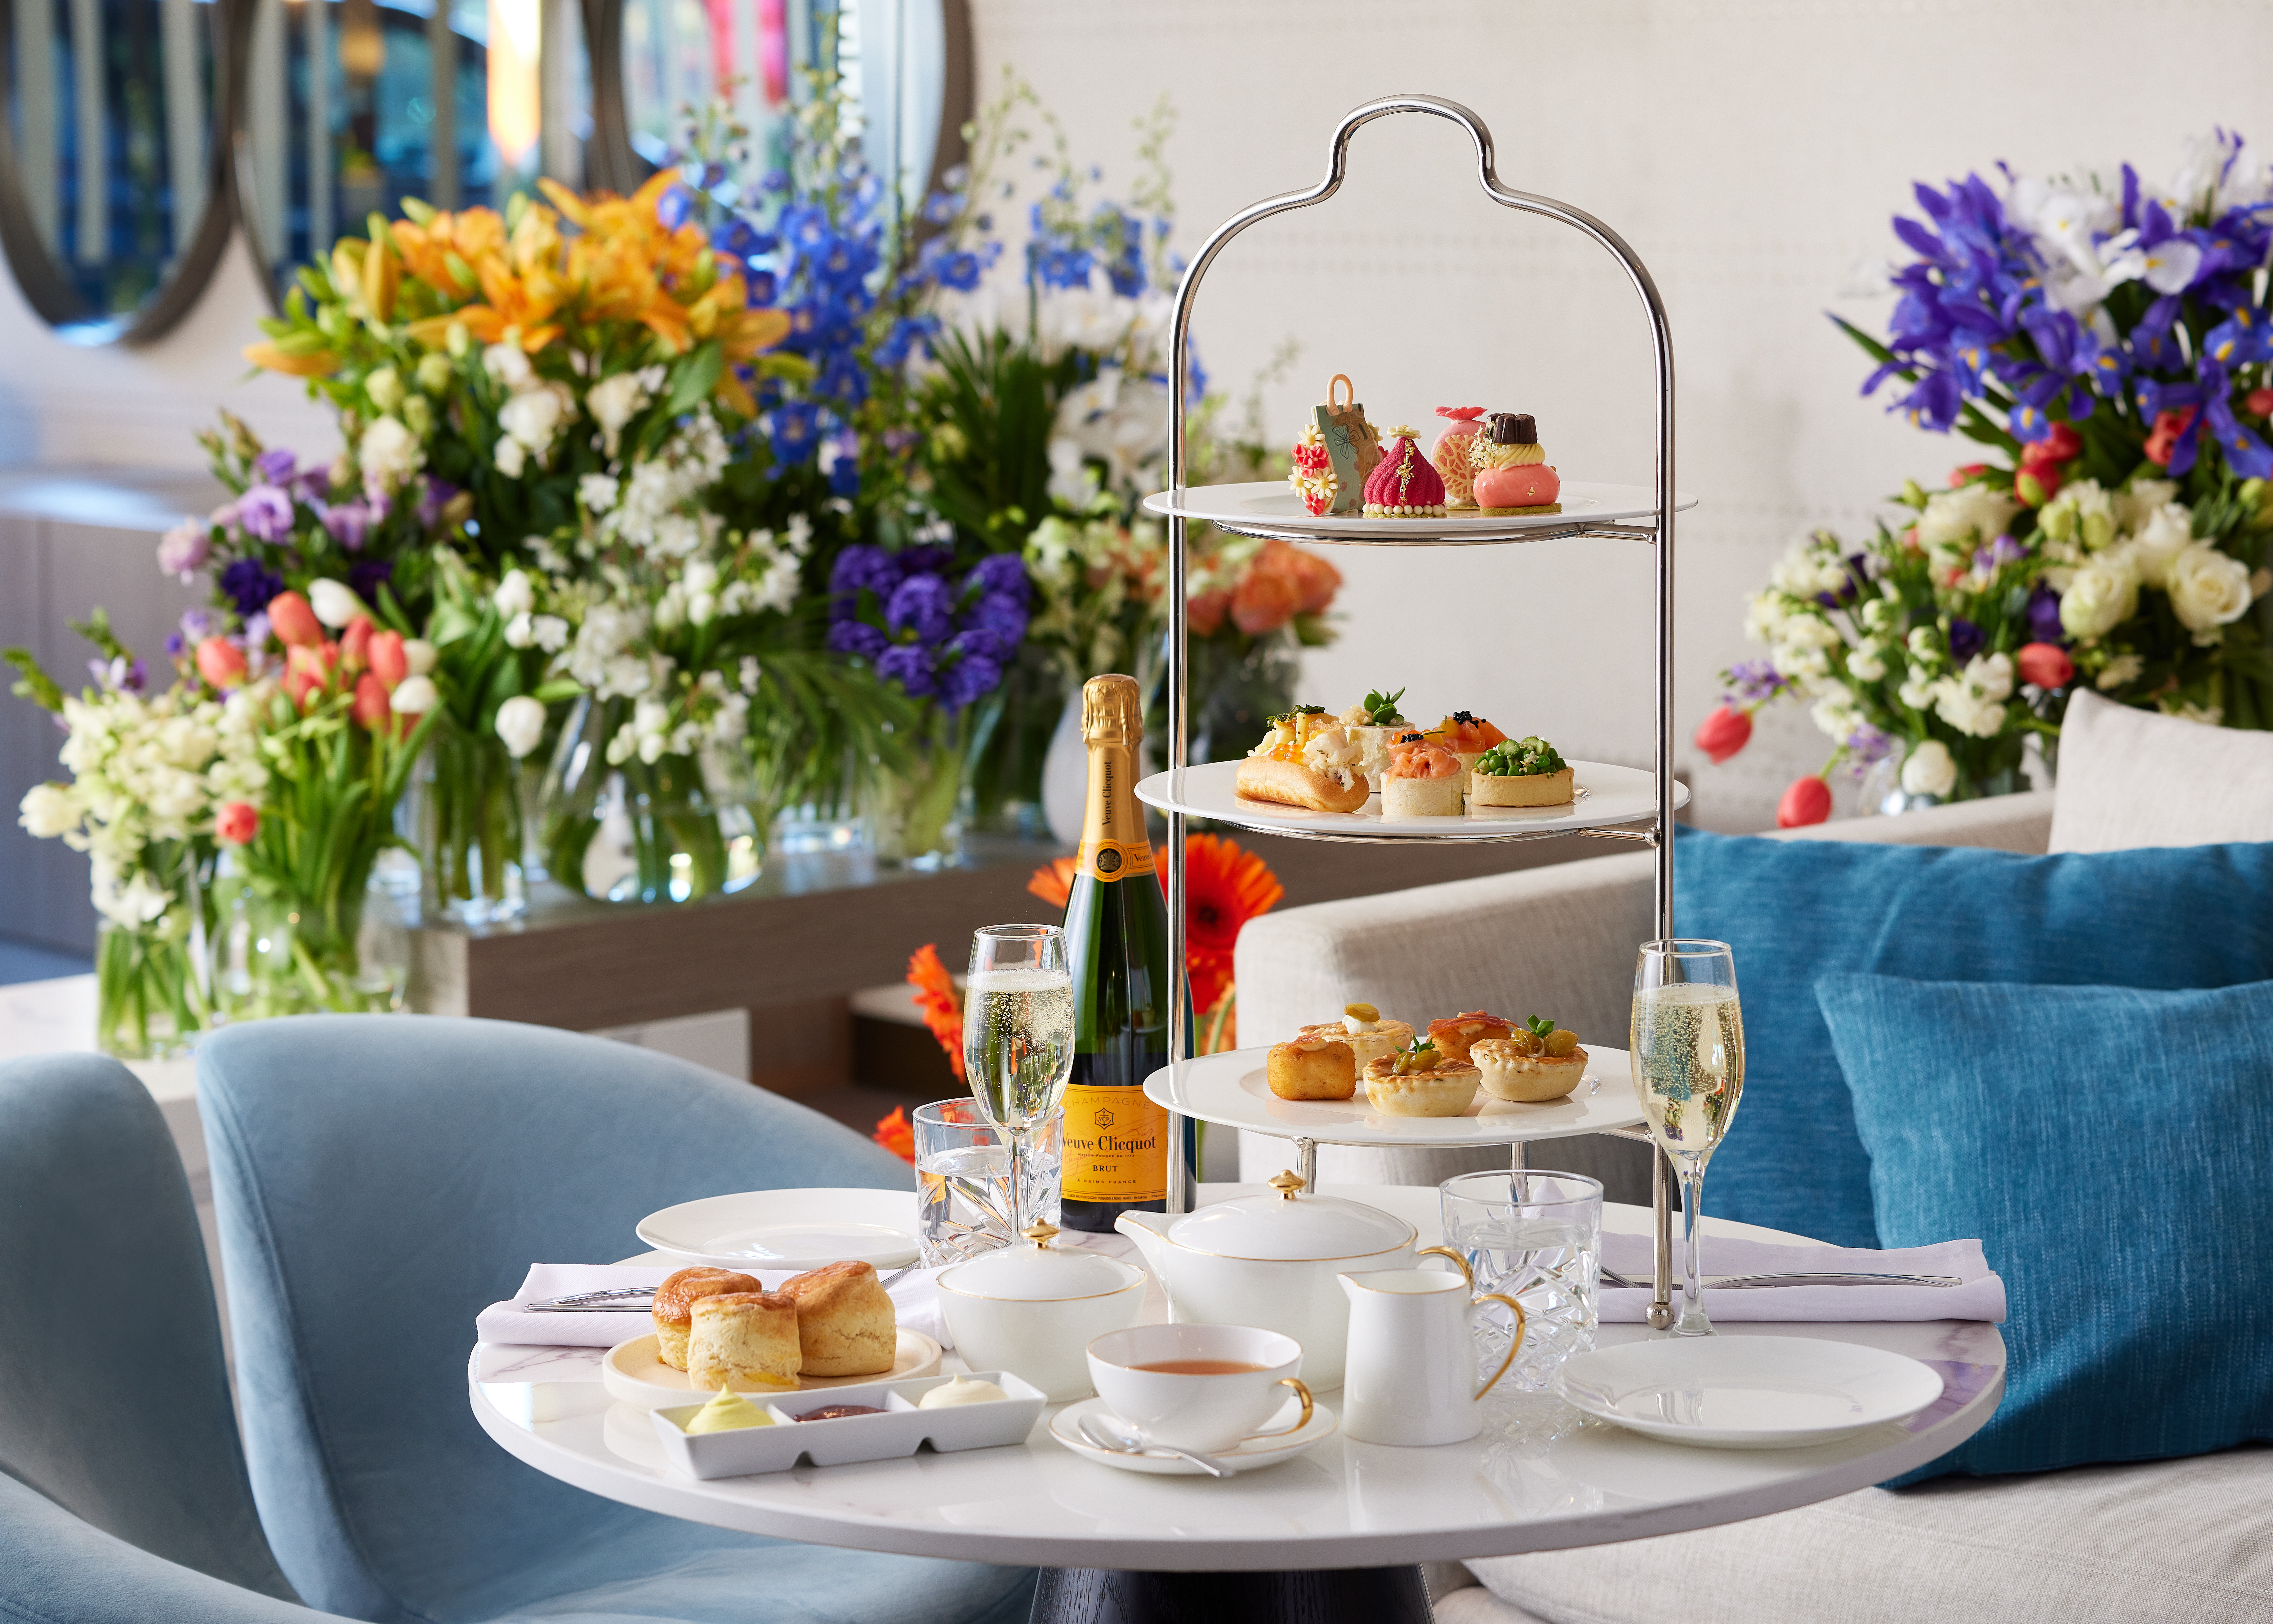 Indulge in Pan Pacific Melbourne’s new Fashion High Tea this Spring Racing Carnival Season